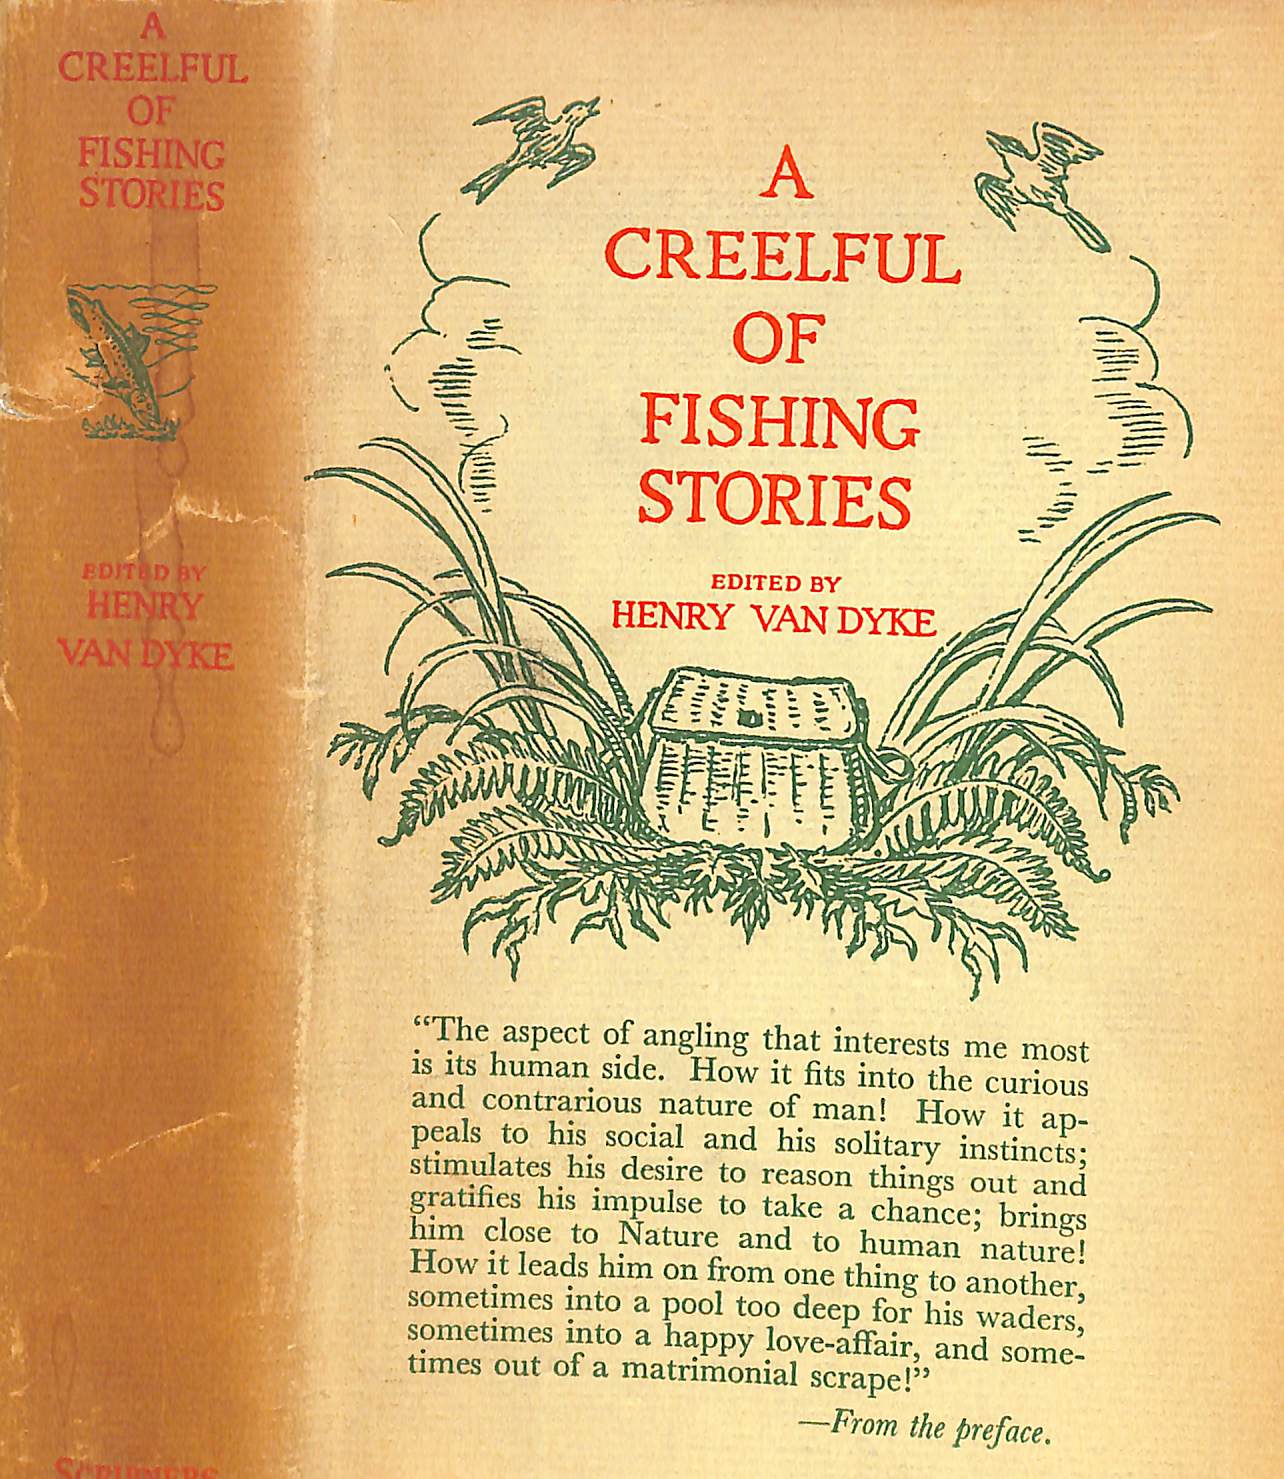 A Creelful Of Fishing Stories 1932 VAN DYKE, Henry [edited by] (SOLD